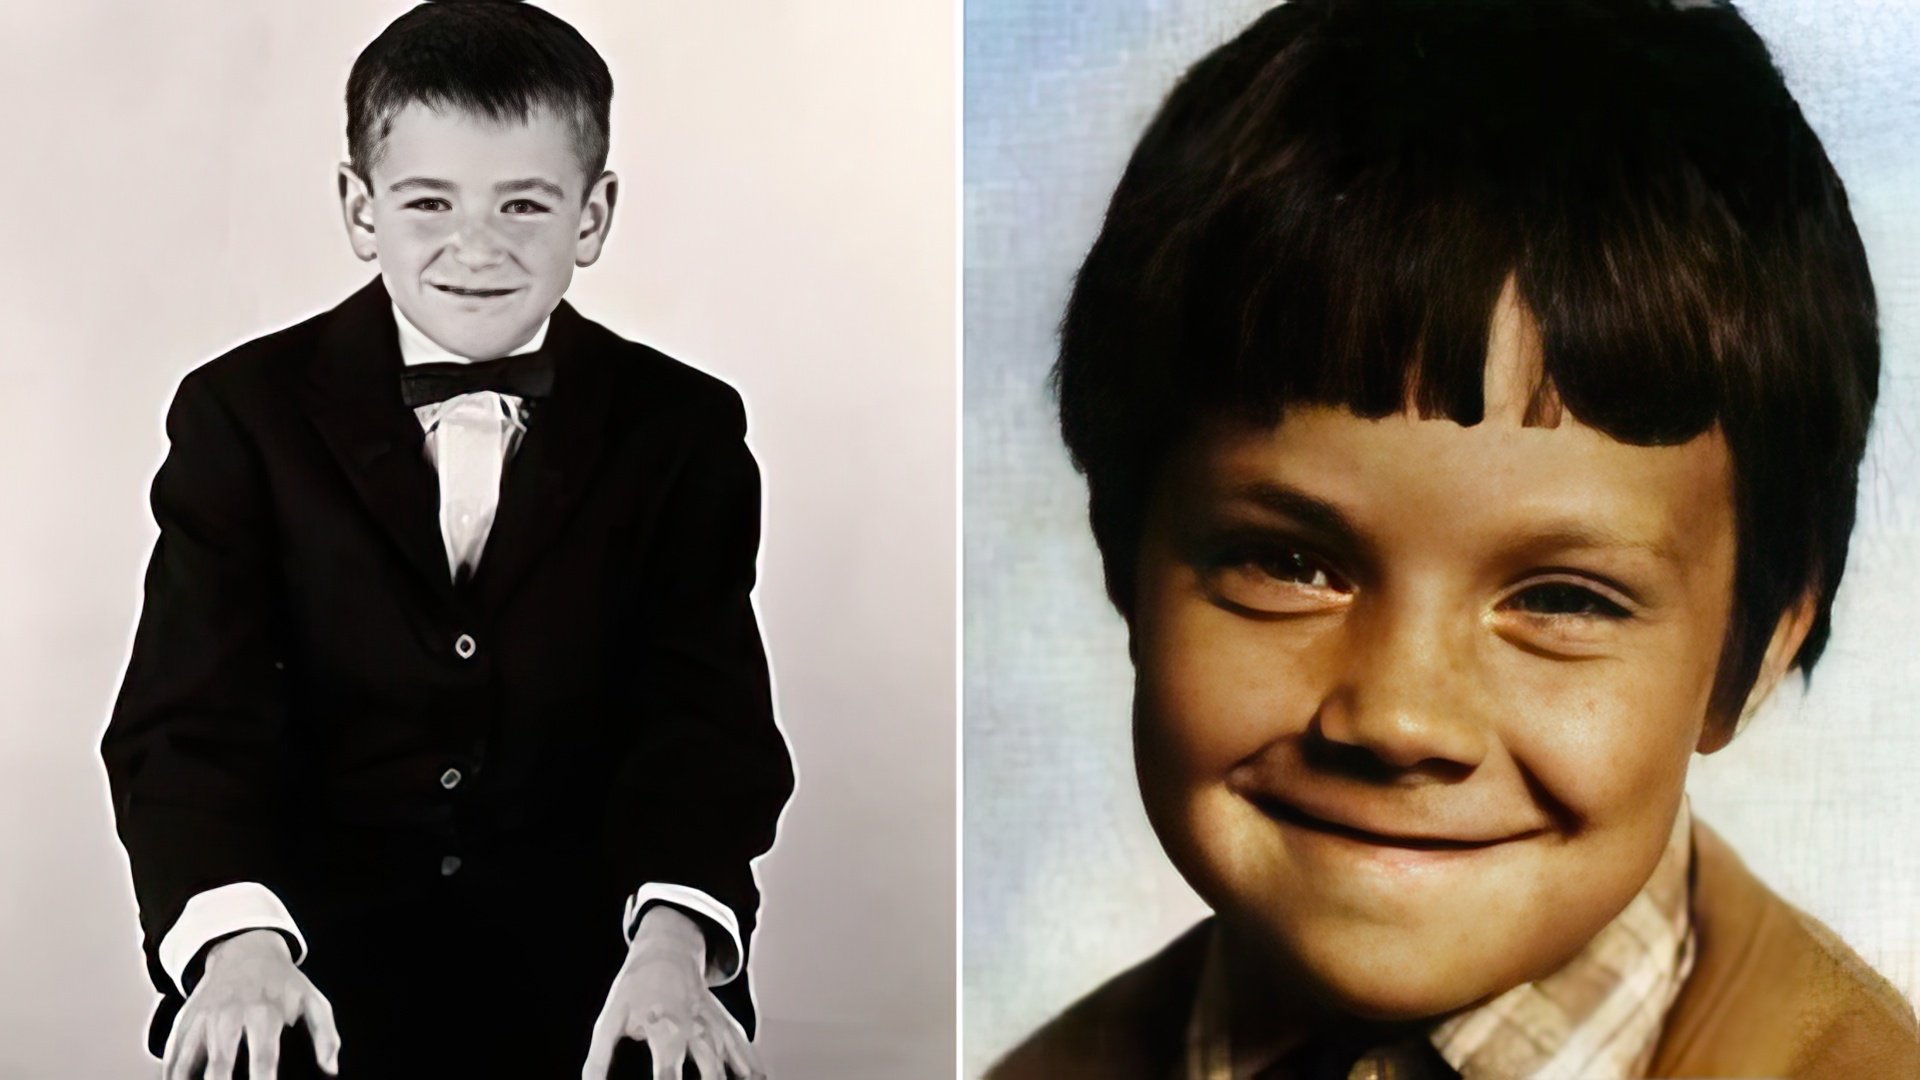 Robin Williams as a child